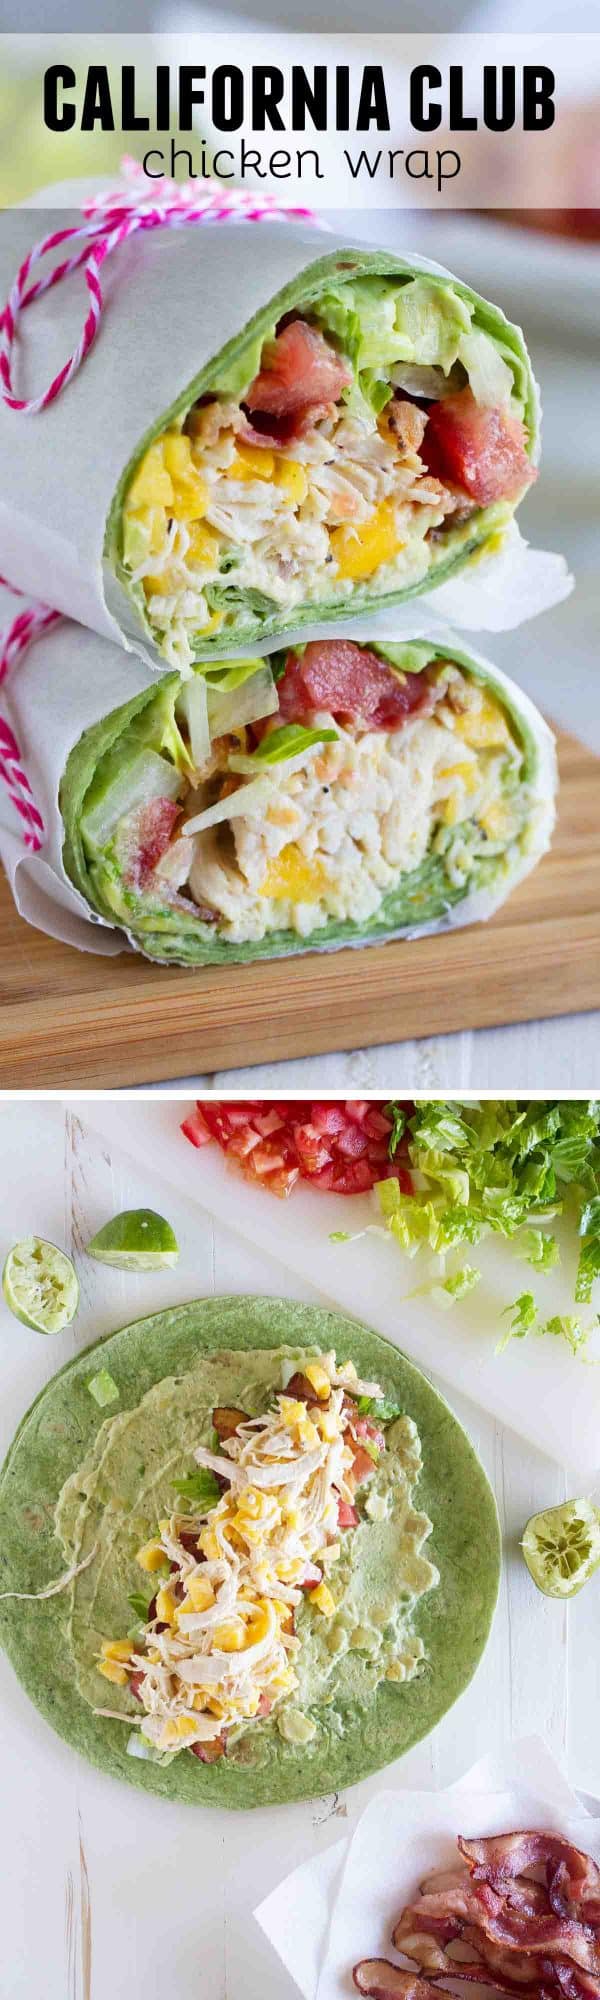 Shredded chicken, mango, avocado and bacon are the stars in this easy California Club Chicken Wrap that is perfect for a weeknight.